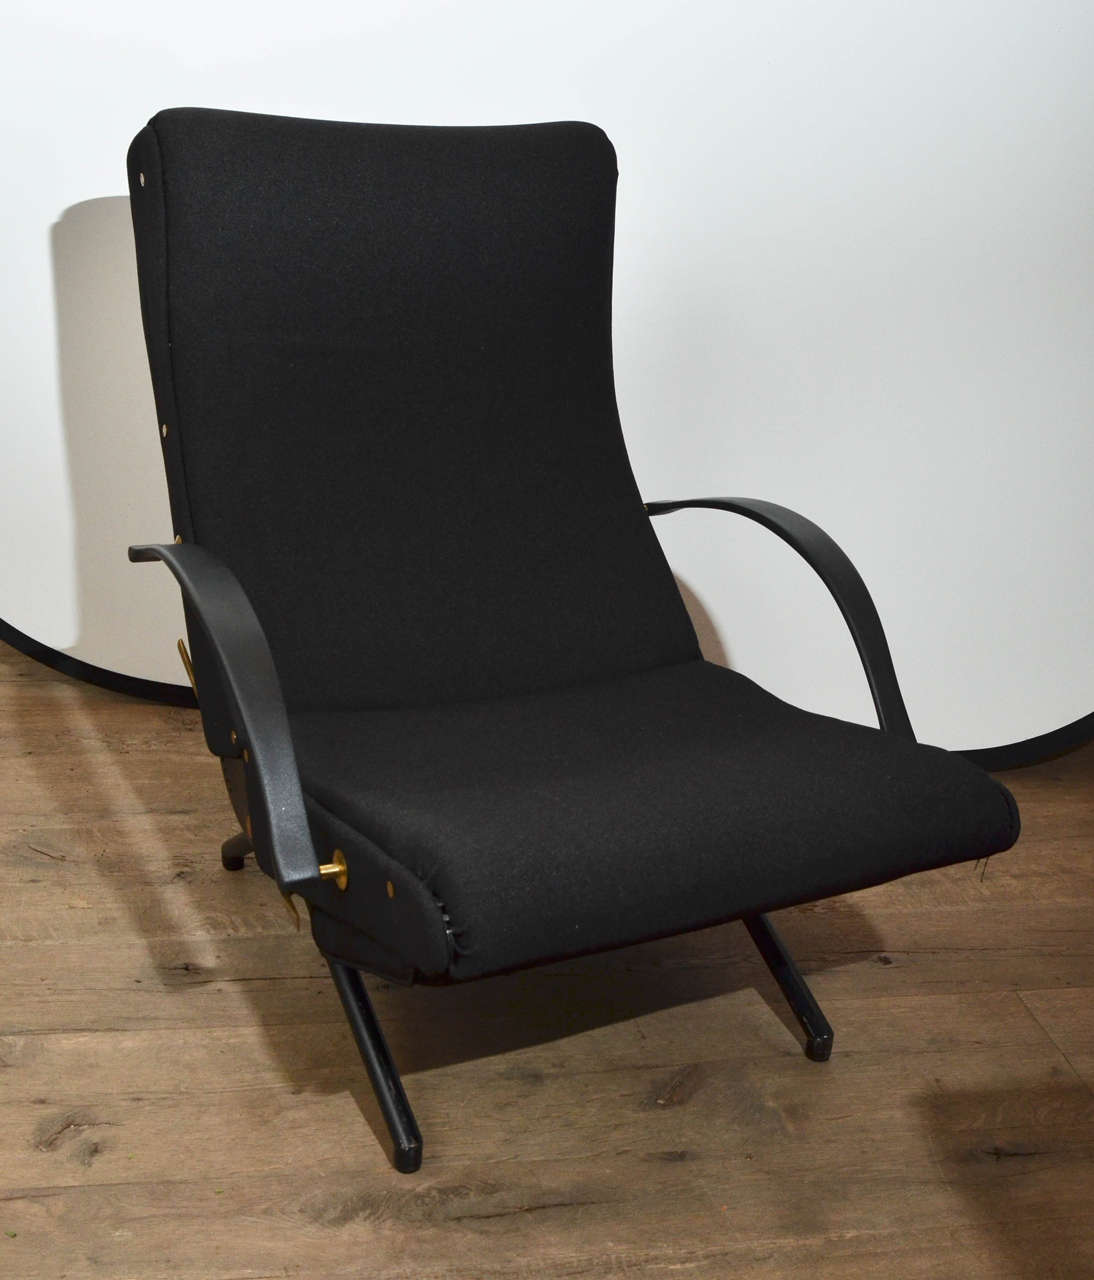 Beautiful Mid-Century 1950's Osvaldo Borsani Chaise Longue Model P-40 in Black Wool Canvas upholstery. Excellent condition